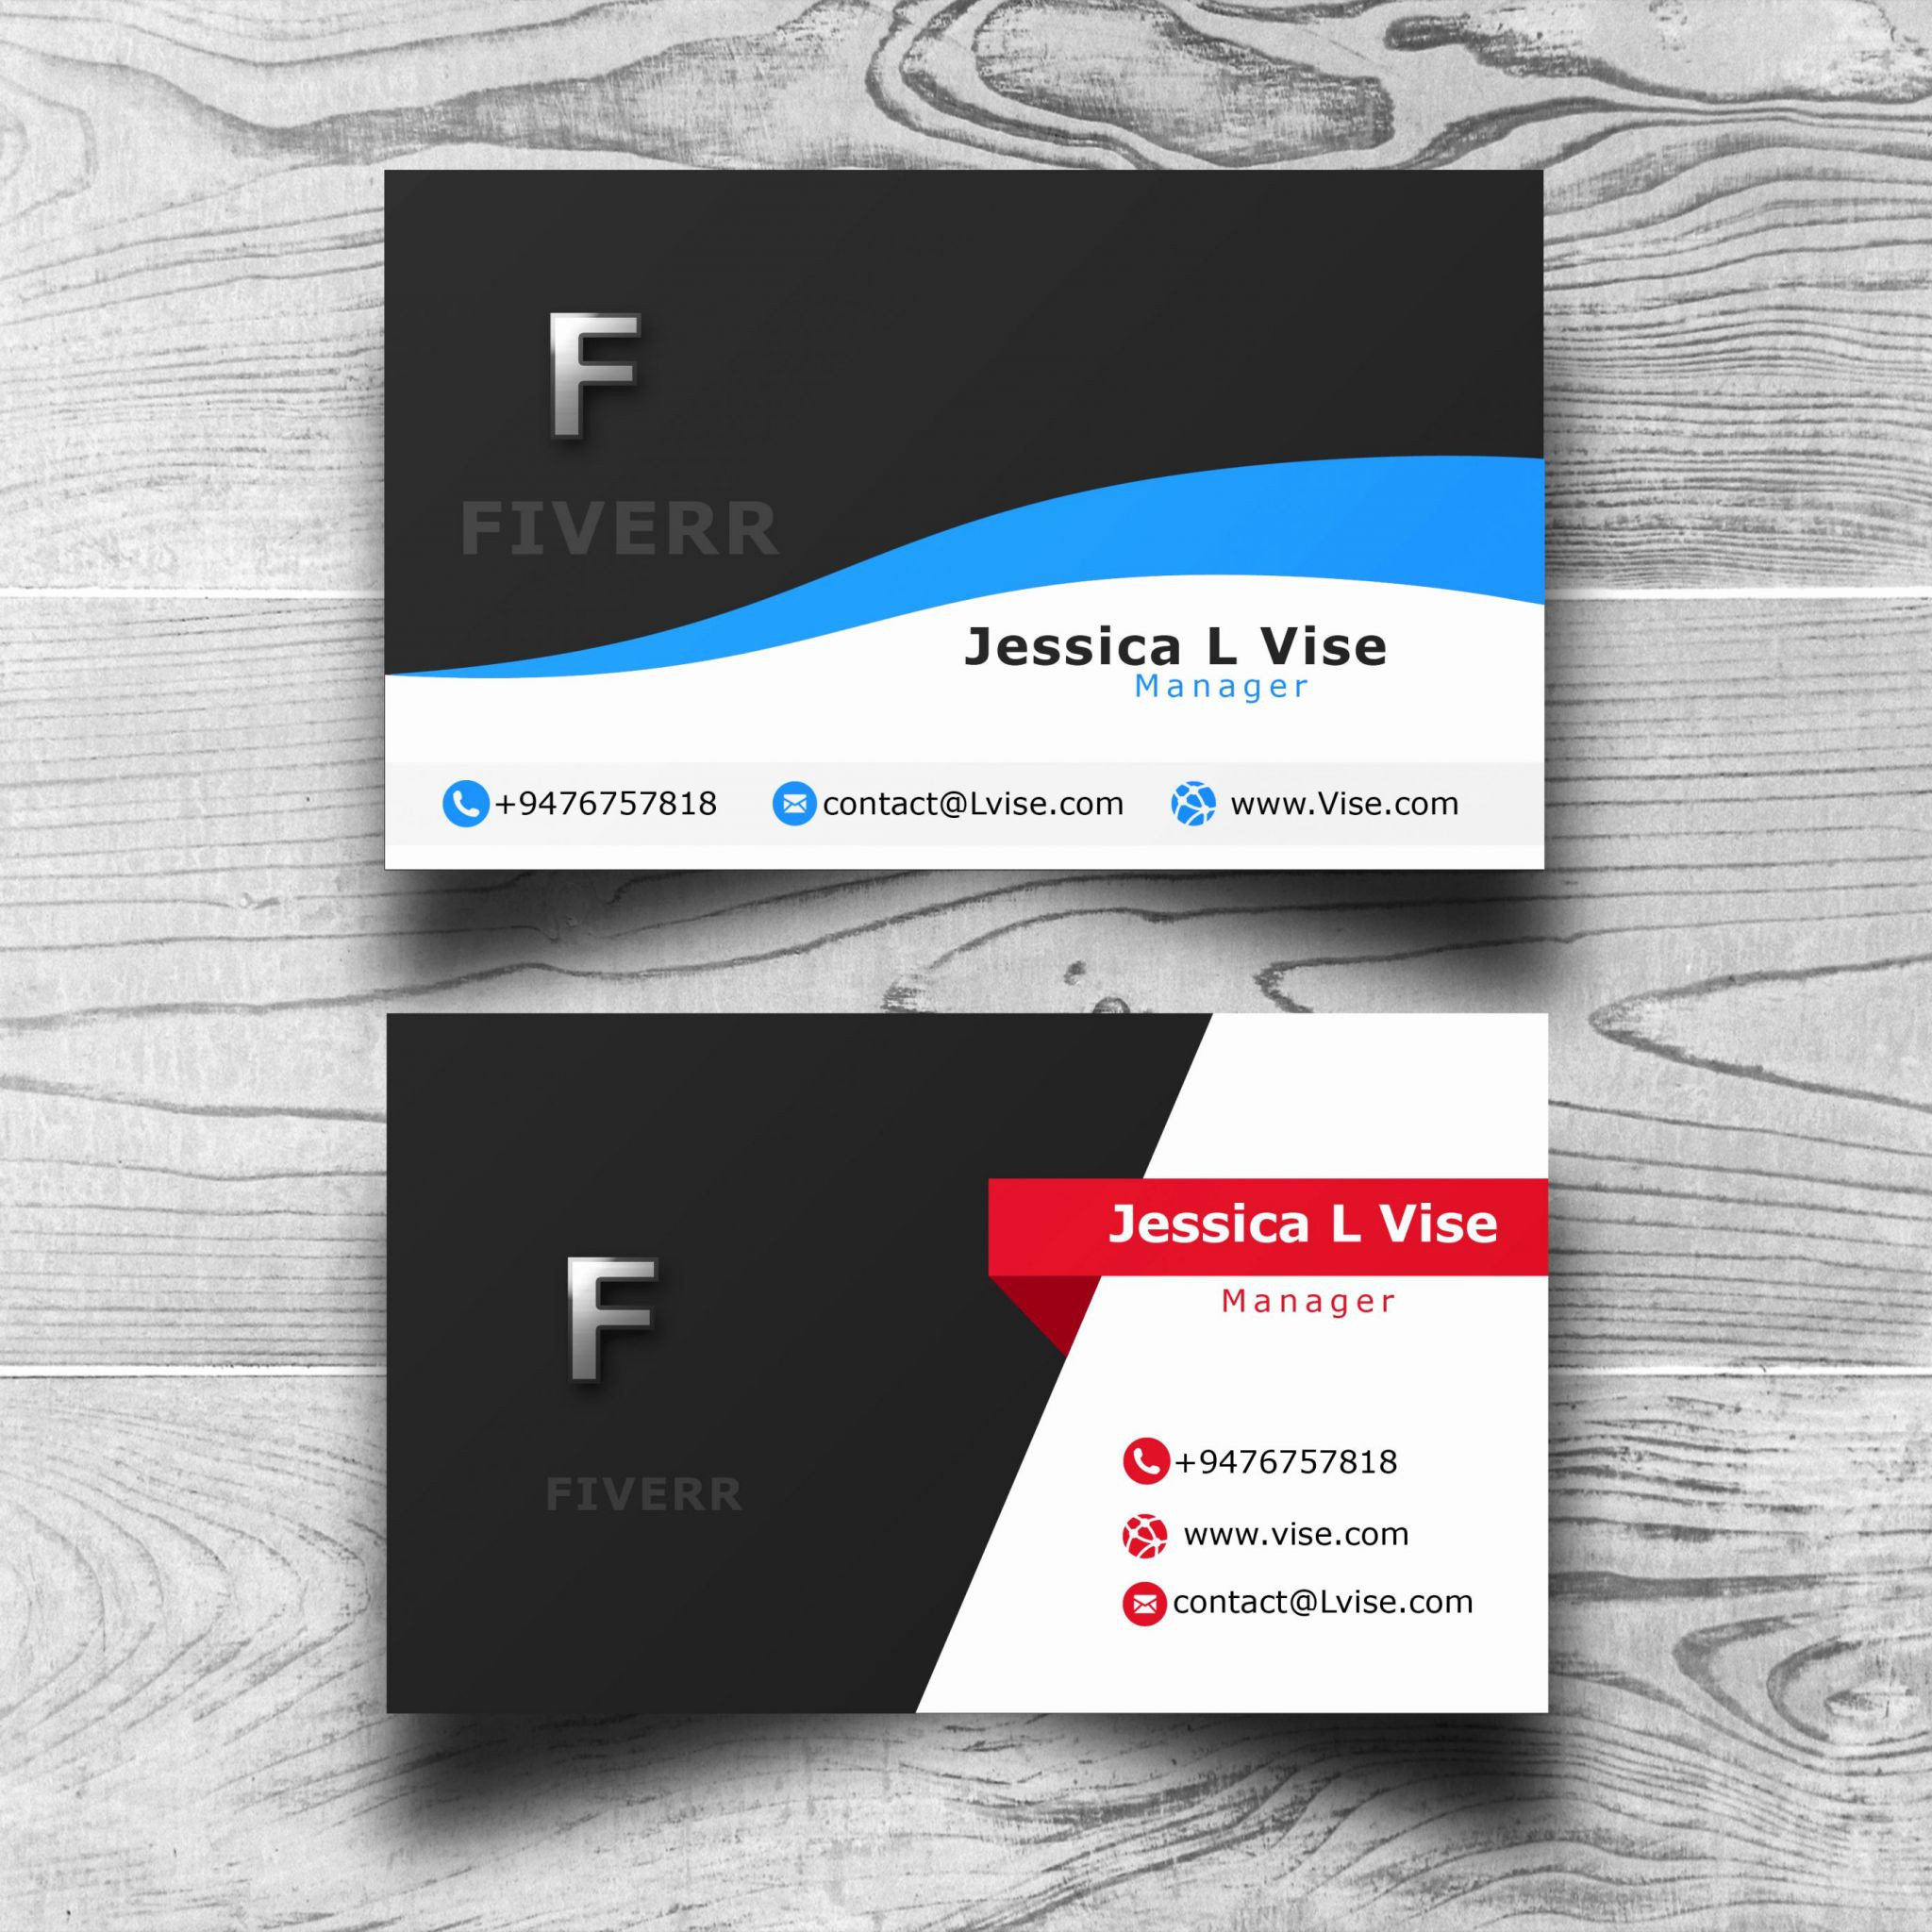 double sided business card template illustrator as well as playing card template word unique free two sided business cards of double sided business card template illustrator